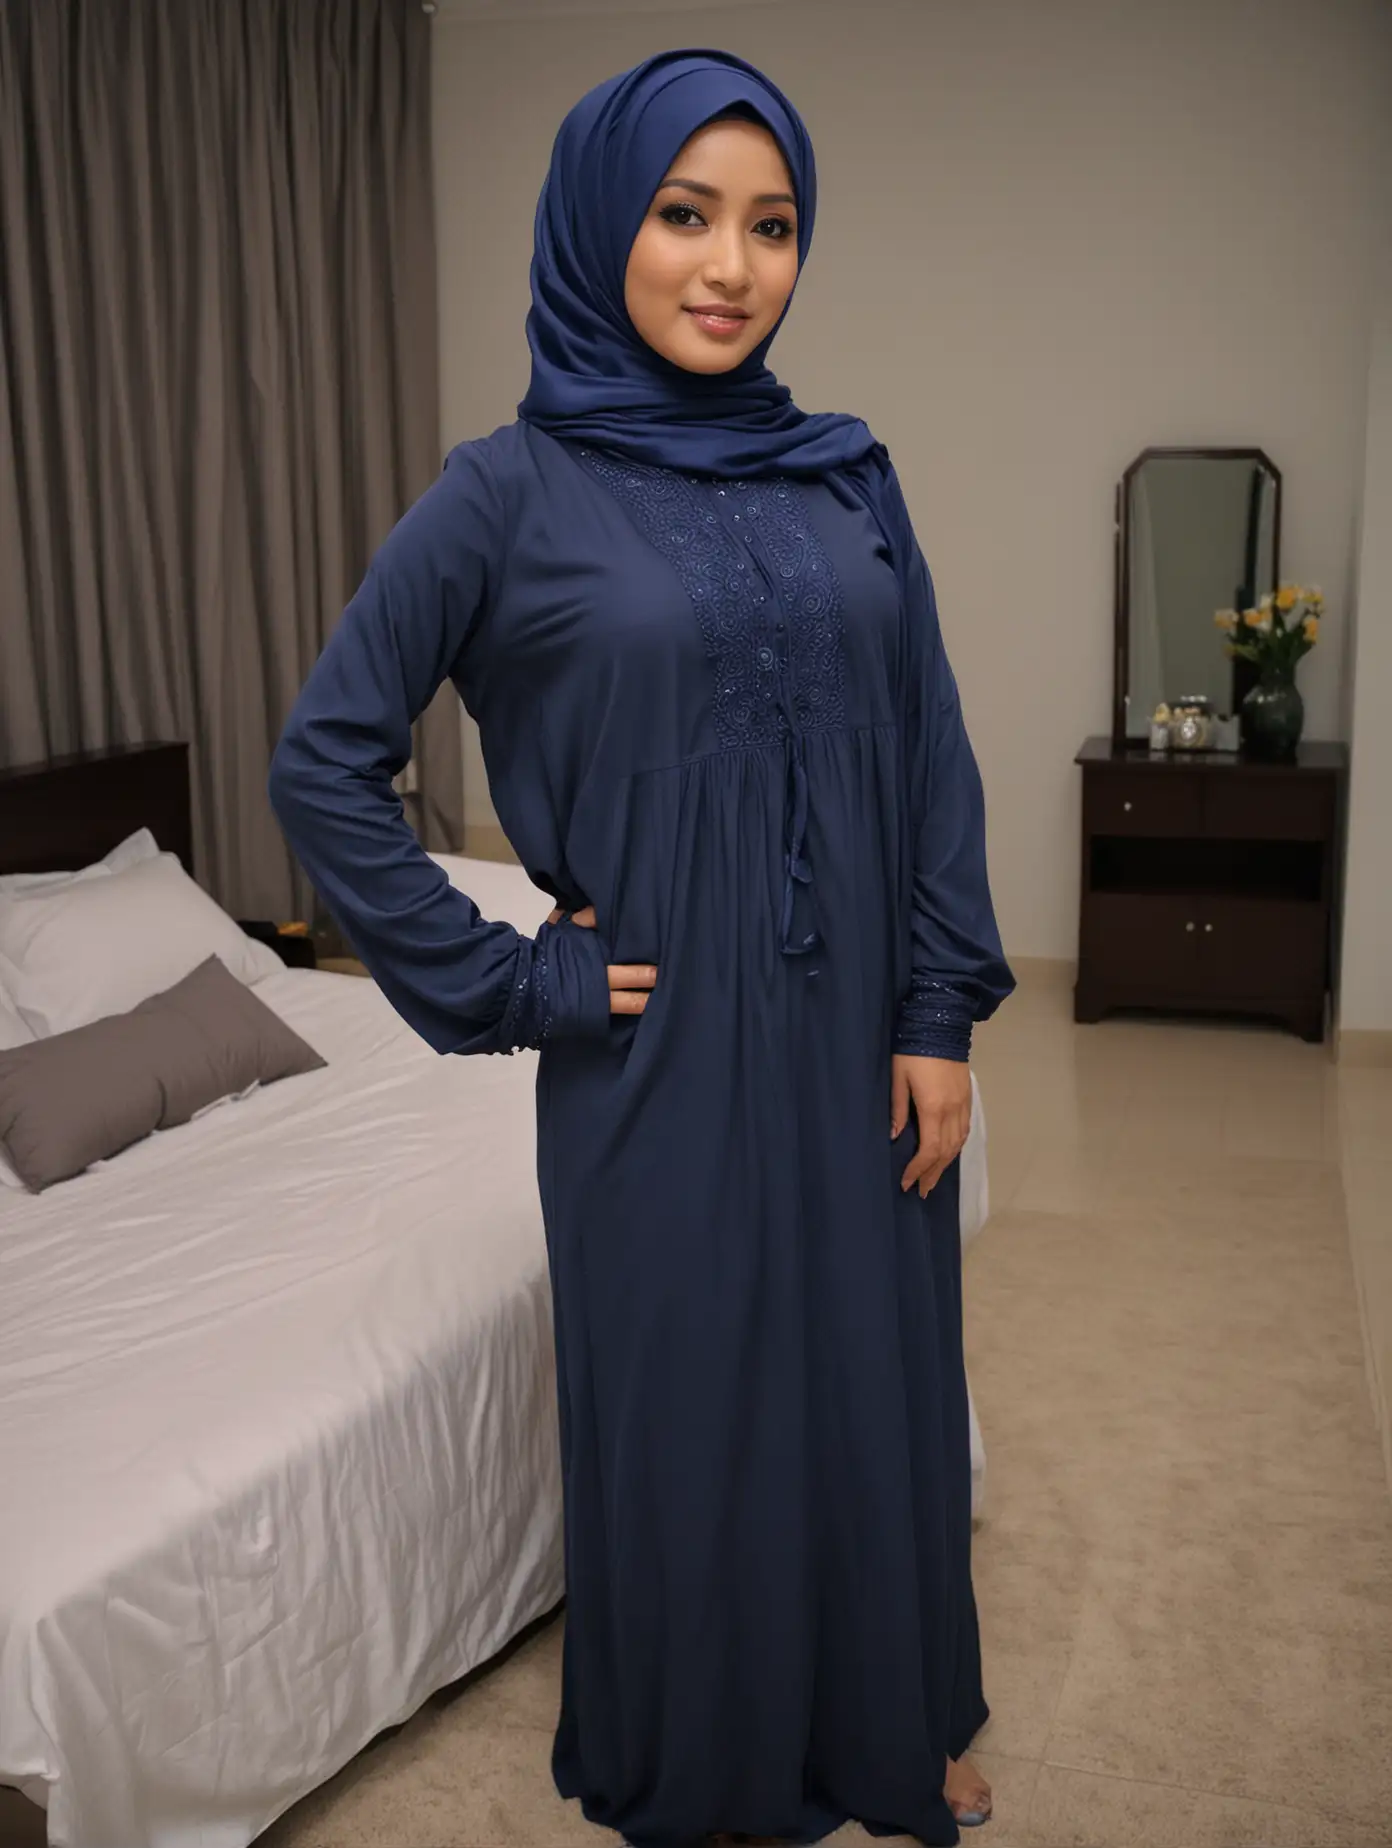 FullBody-Portrait-of-a-Curvy-Indonesian-Woman-in-a-Dark-Blue-Hijab-and-Night-Gown